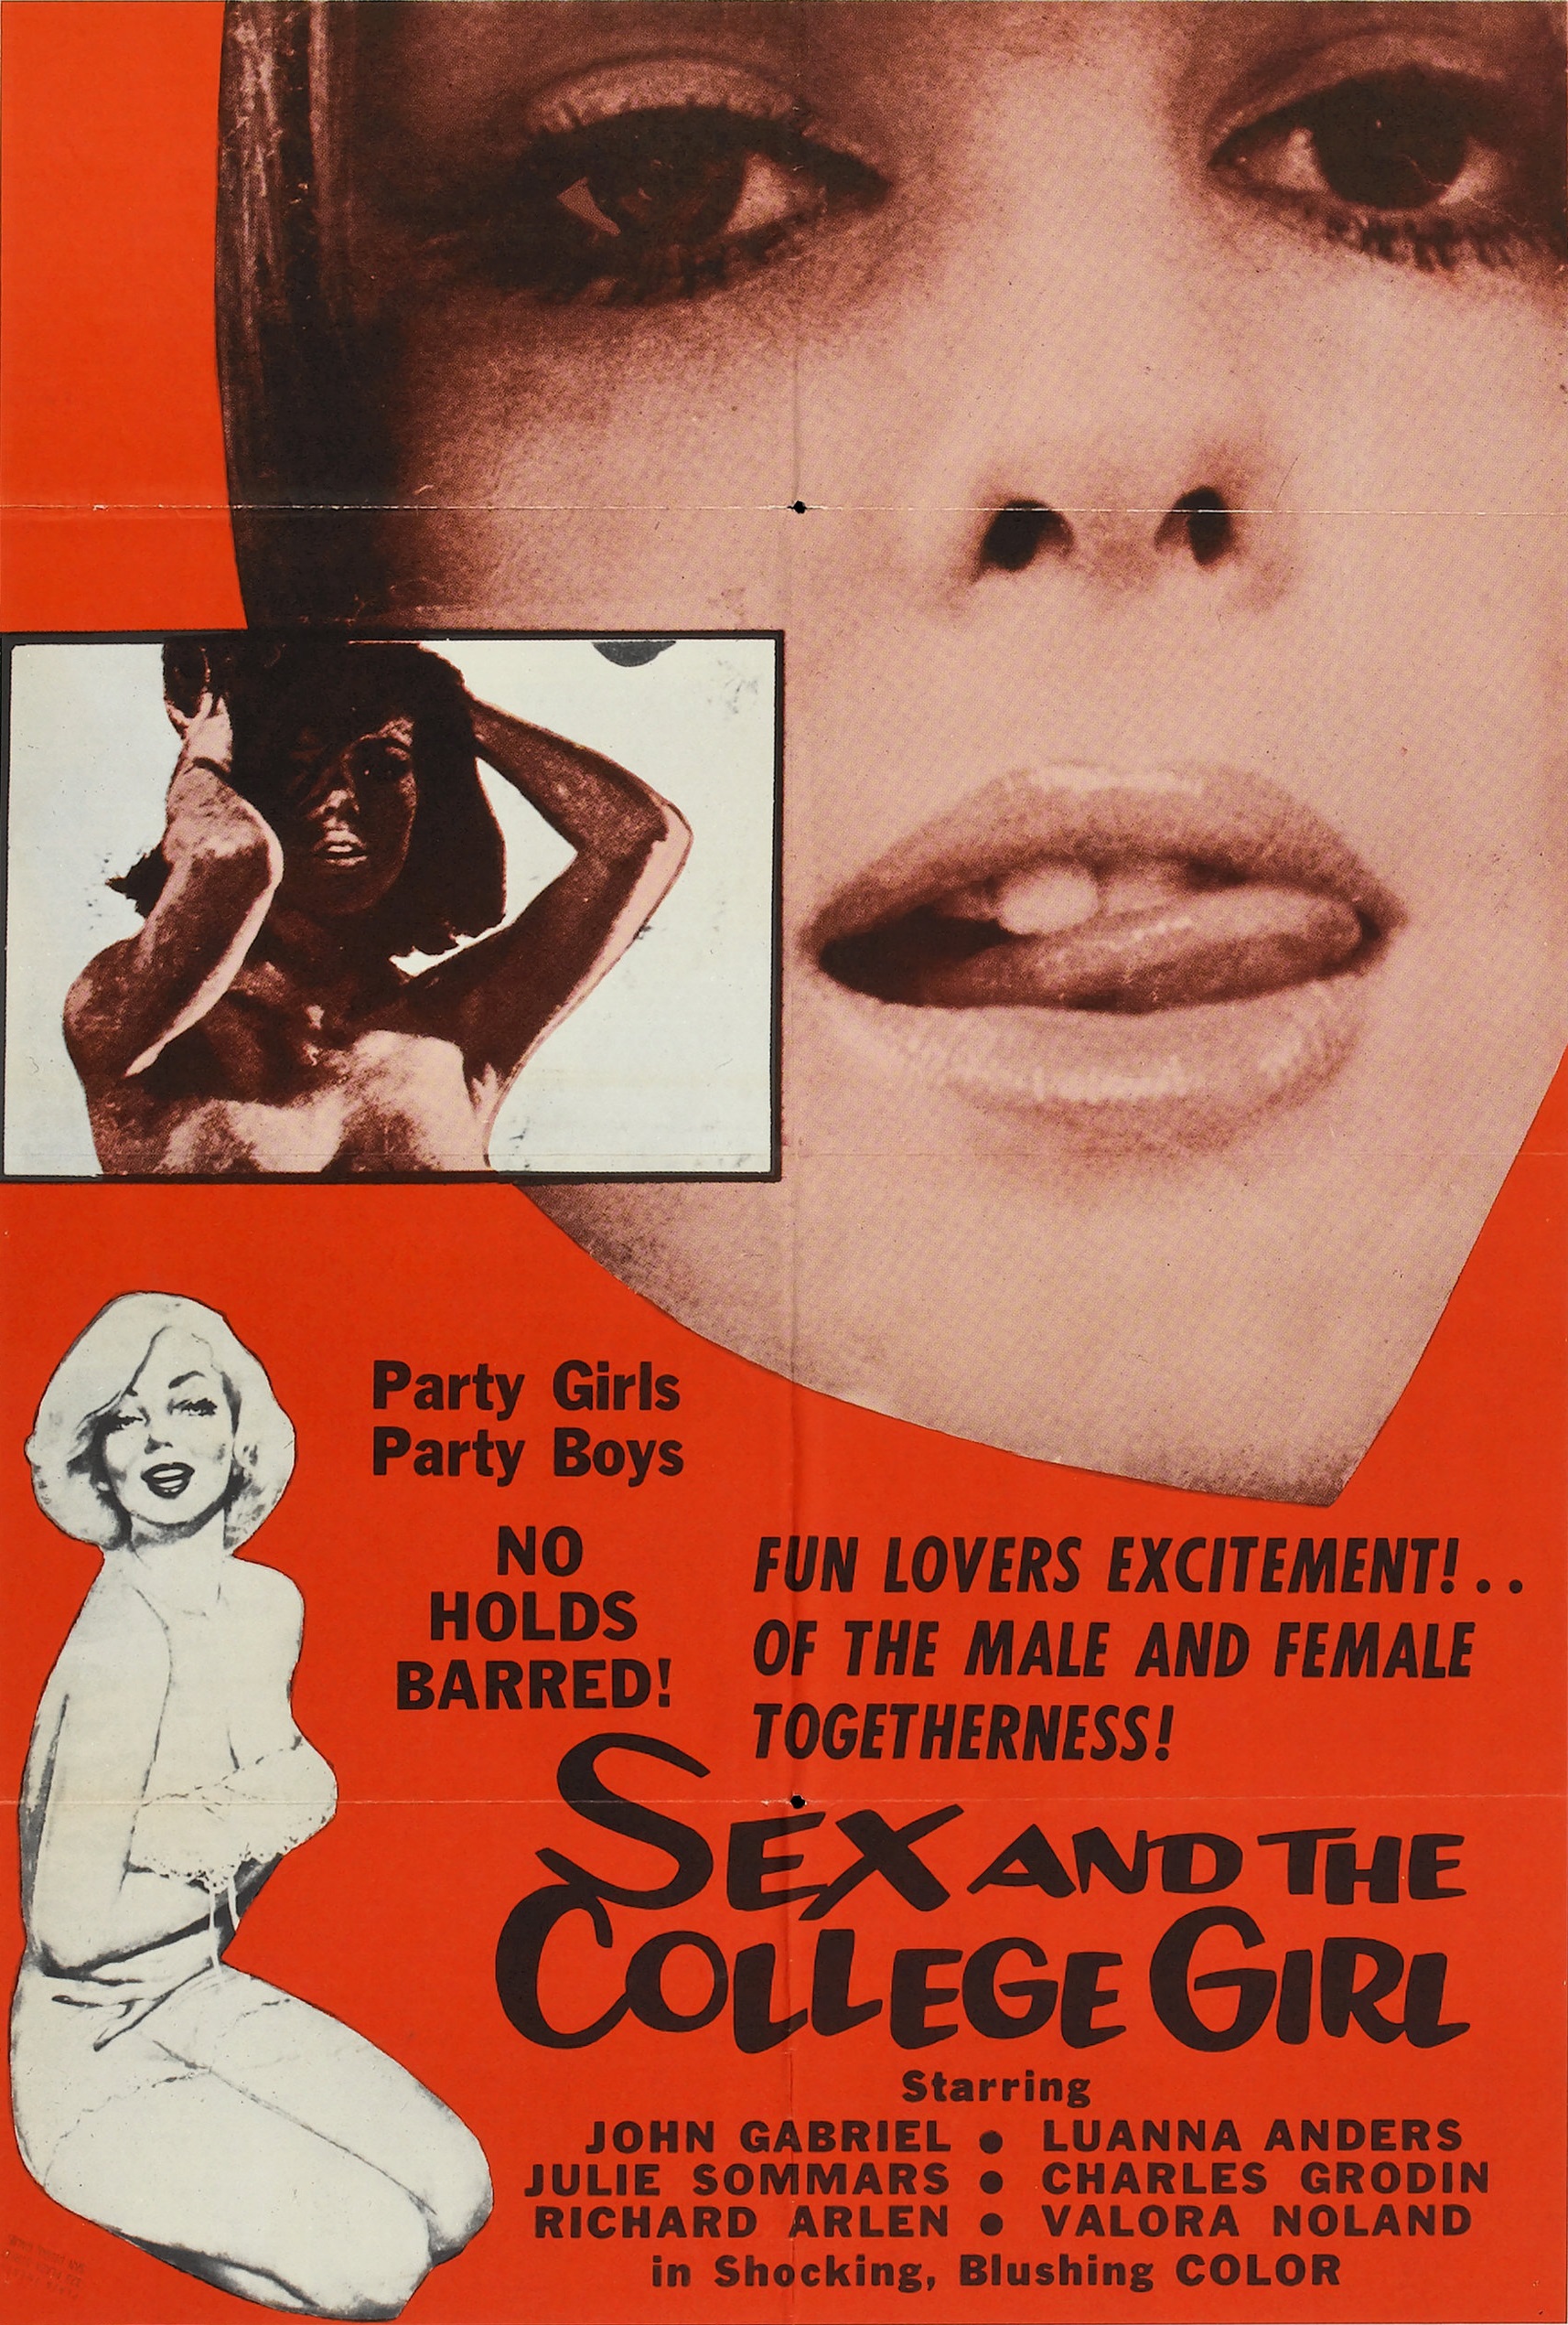 Sex and the College Girl (1964) Screenshot 1